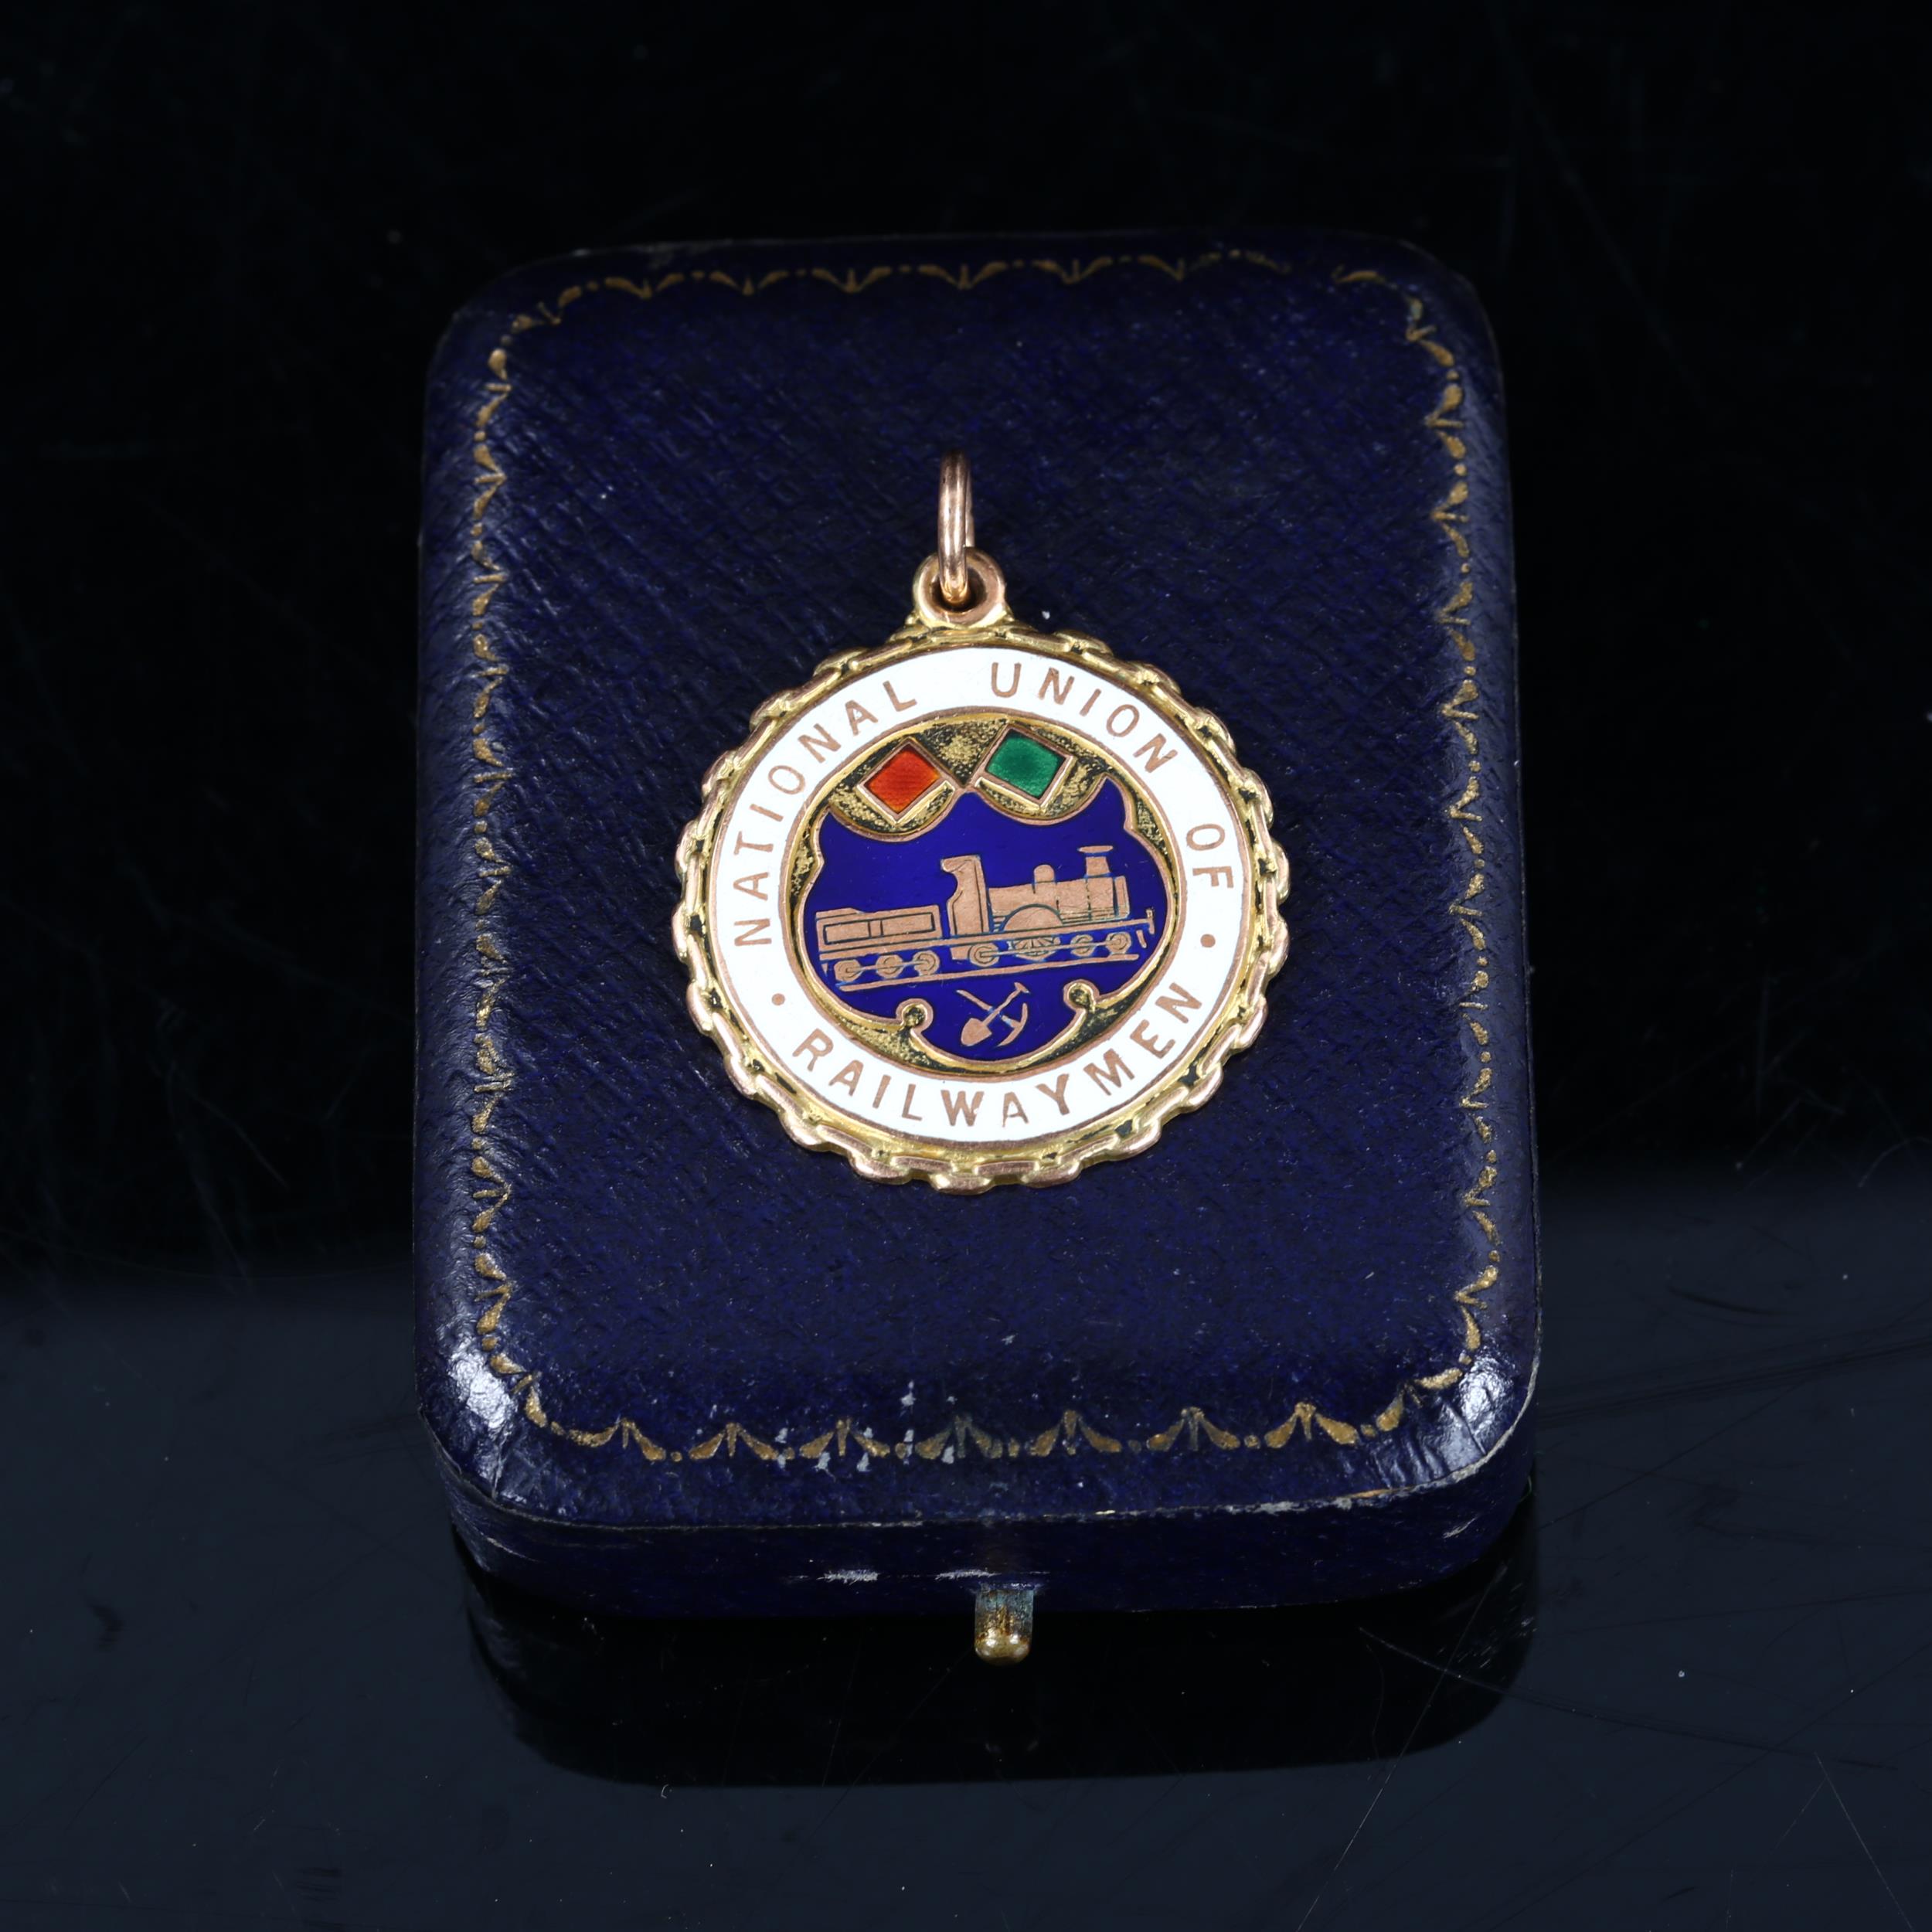 9ct gold and coloured enamel National Union Of Railwaymen fob, dated 1921, 27mm across